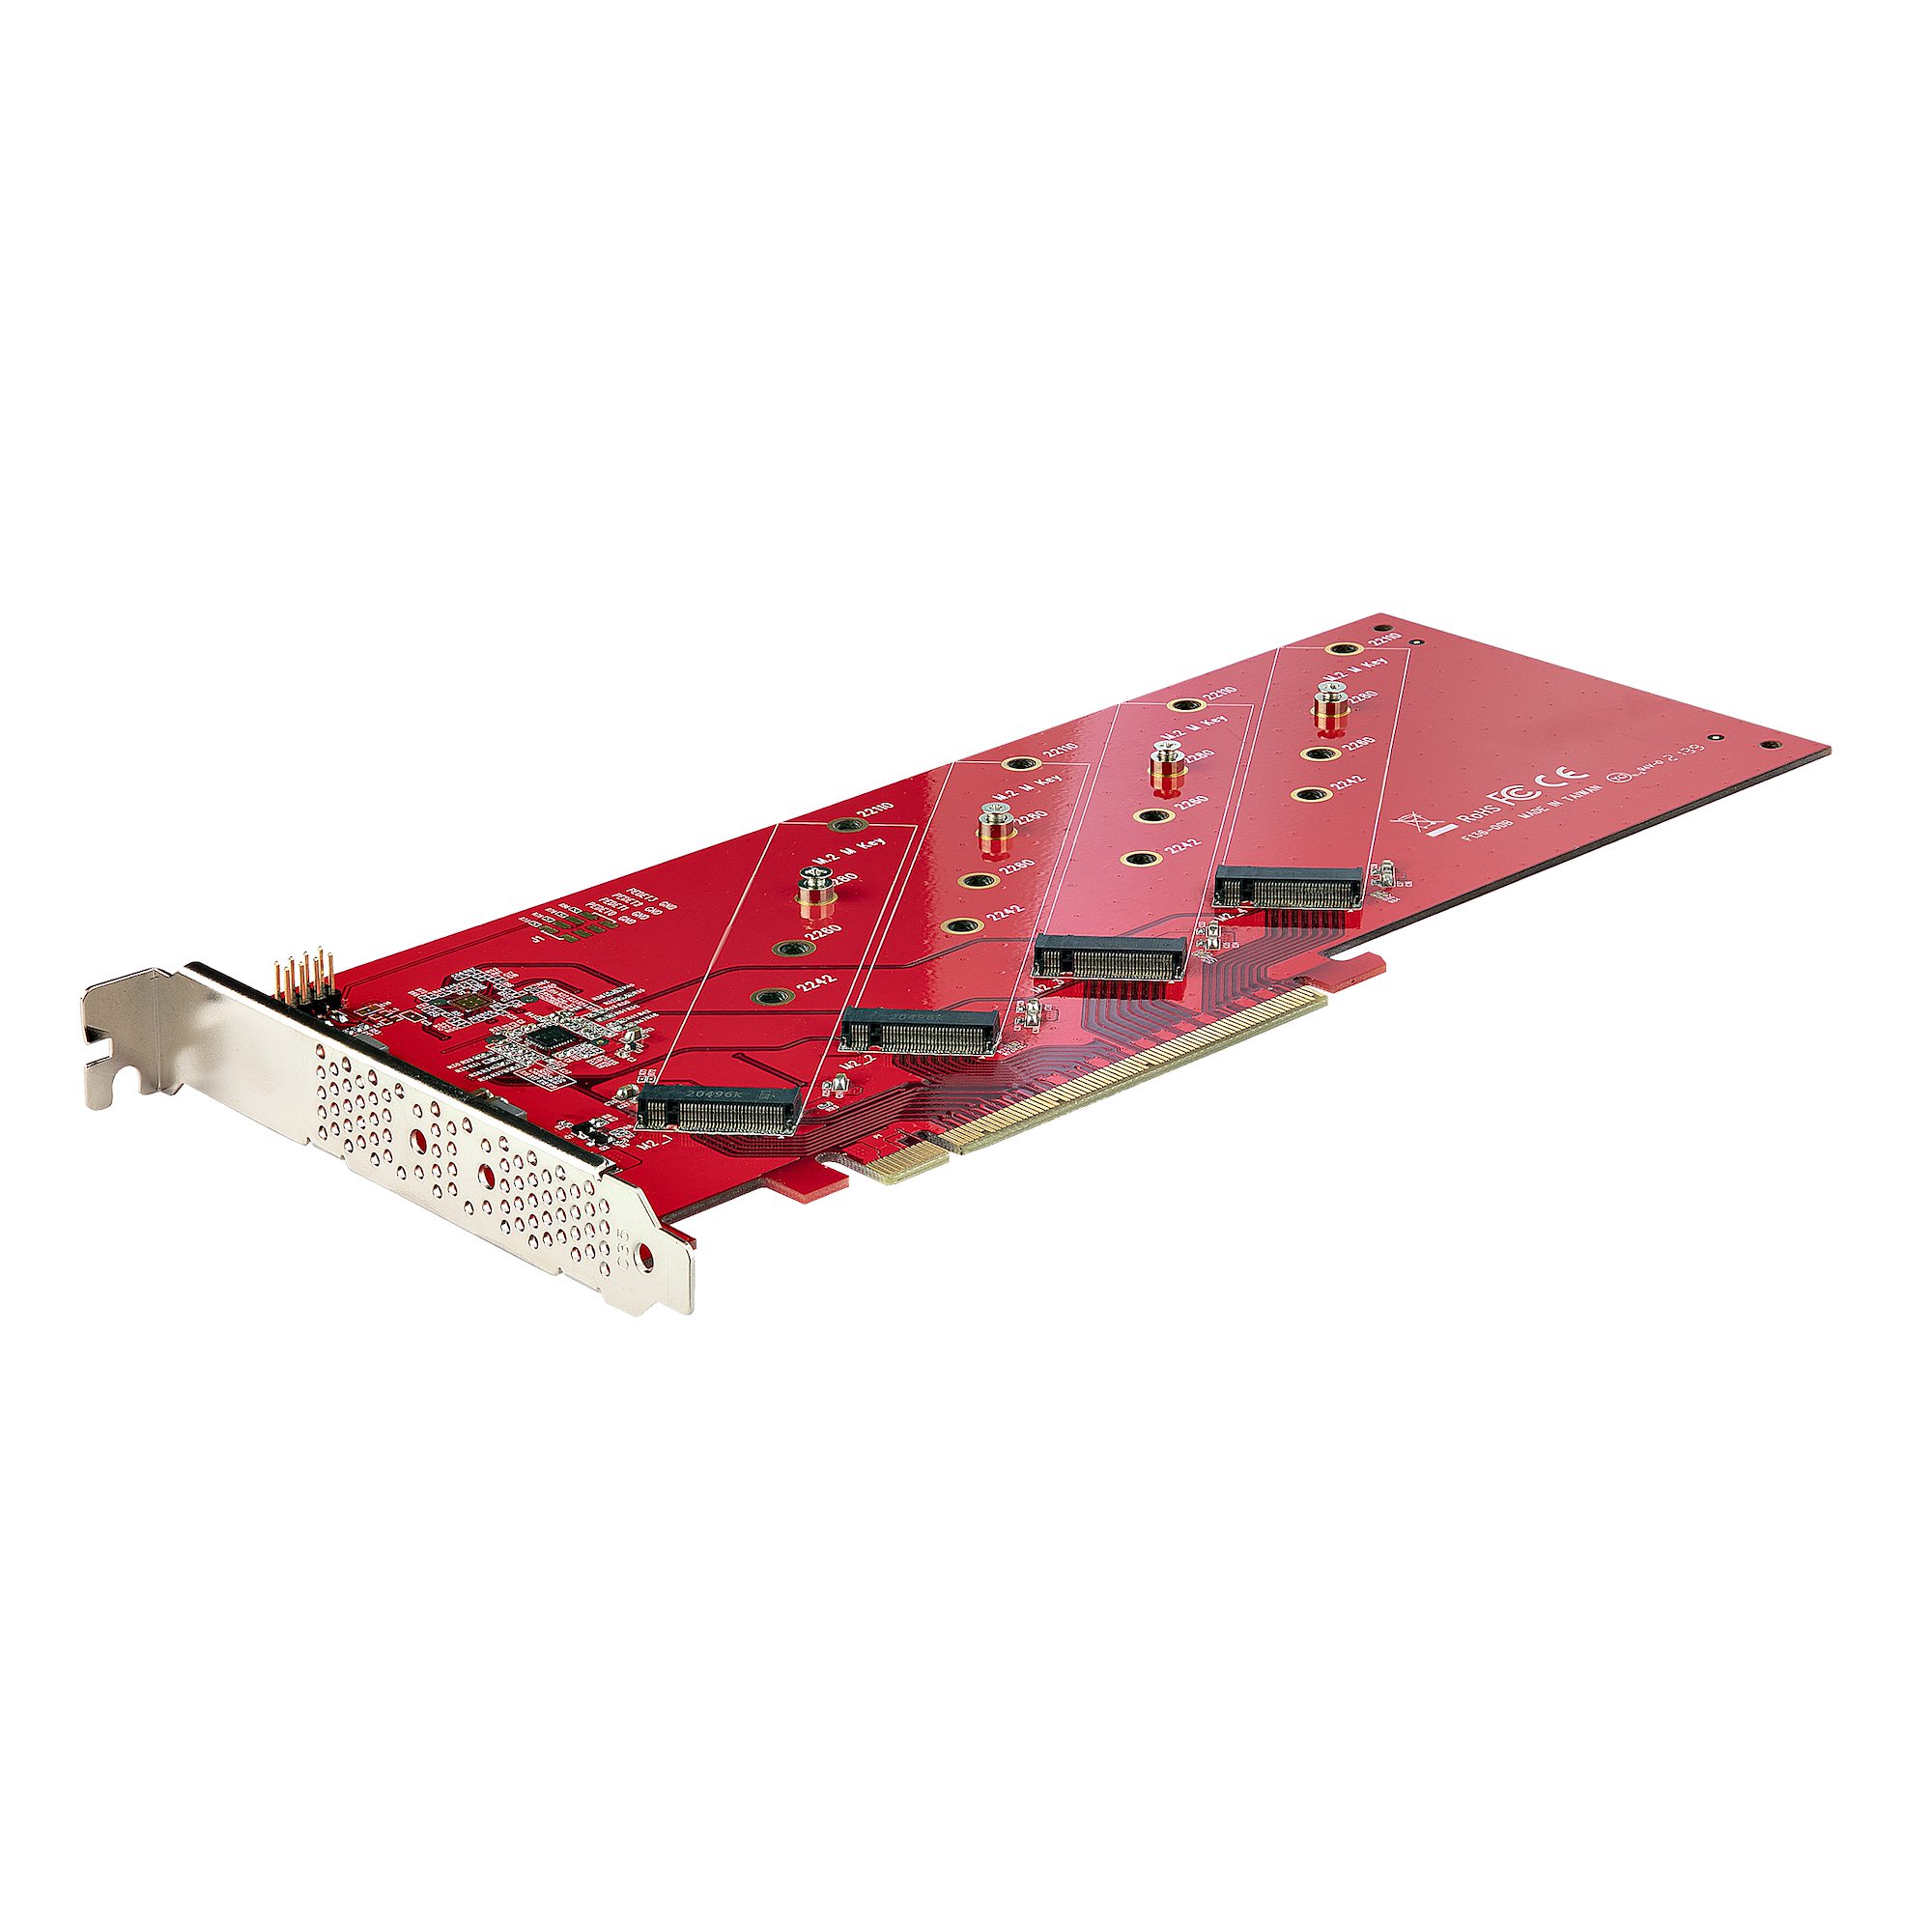 Visne stewardesse Selskabelig Quad M.2 PCIe Adapter for NVMe/AHCI SSD - Drive Adapters and Drive  Converters | Hard Drive Accessories | StarTech.com